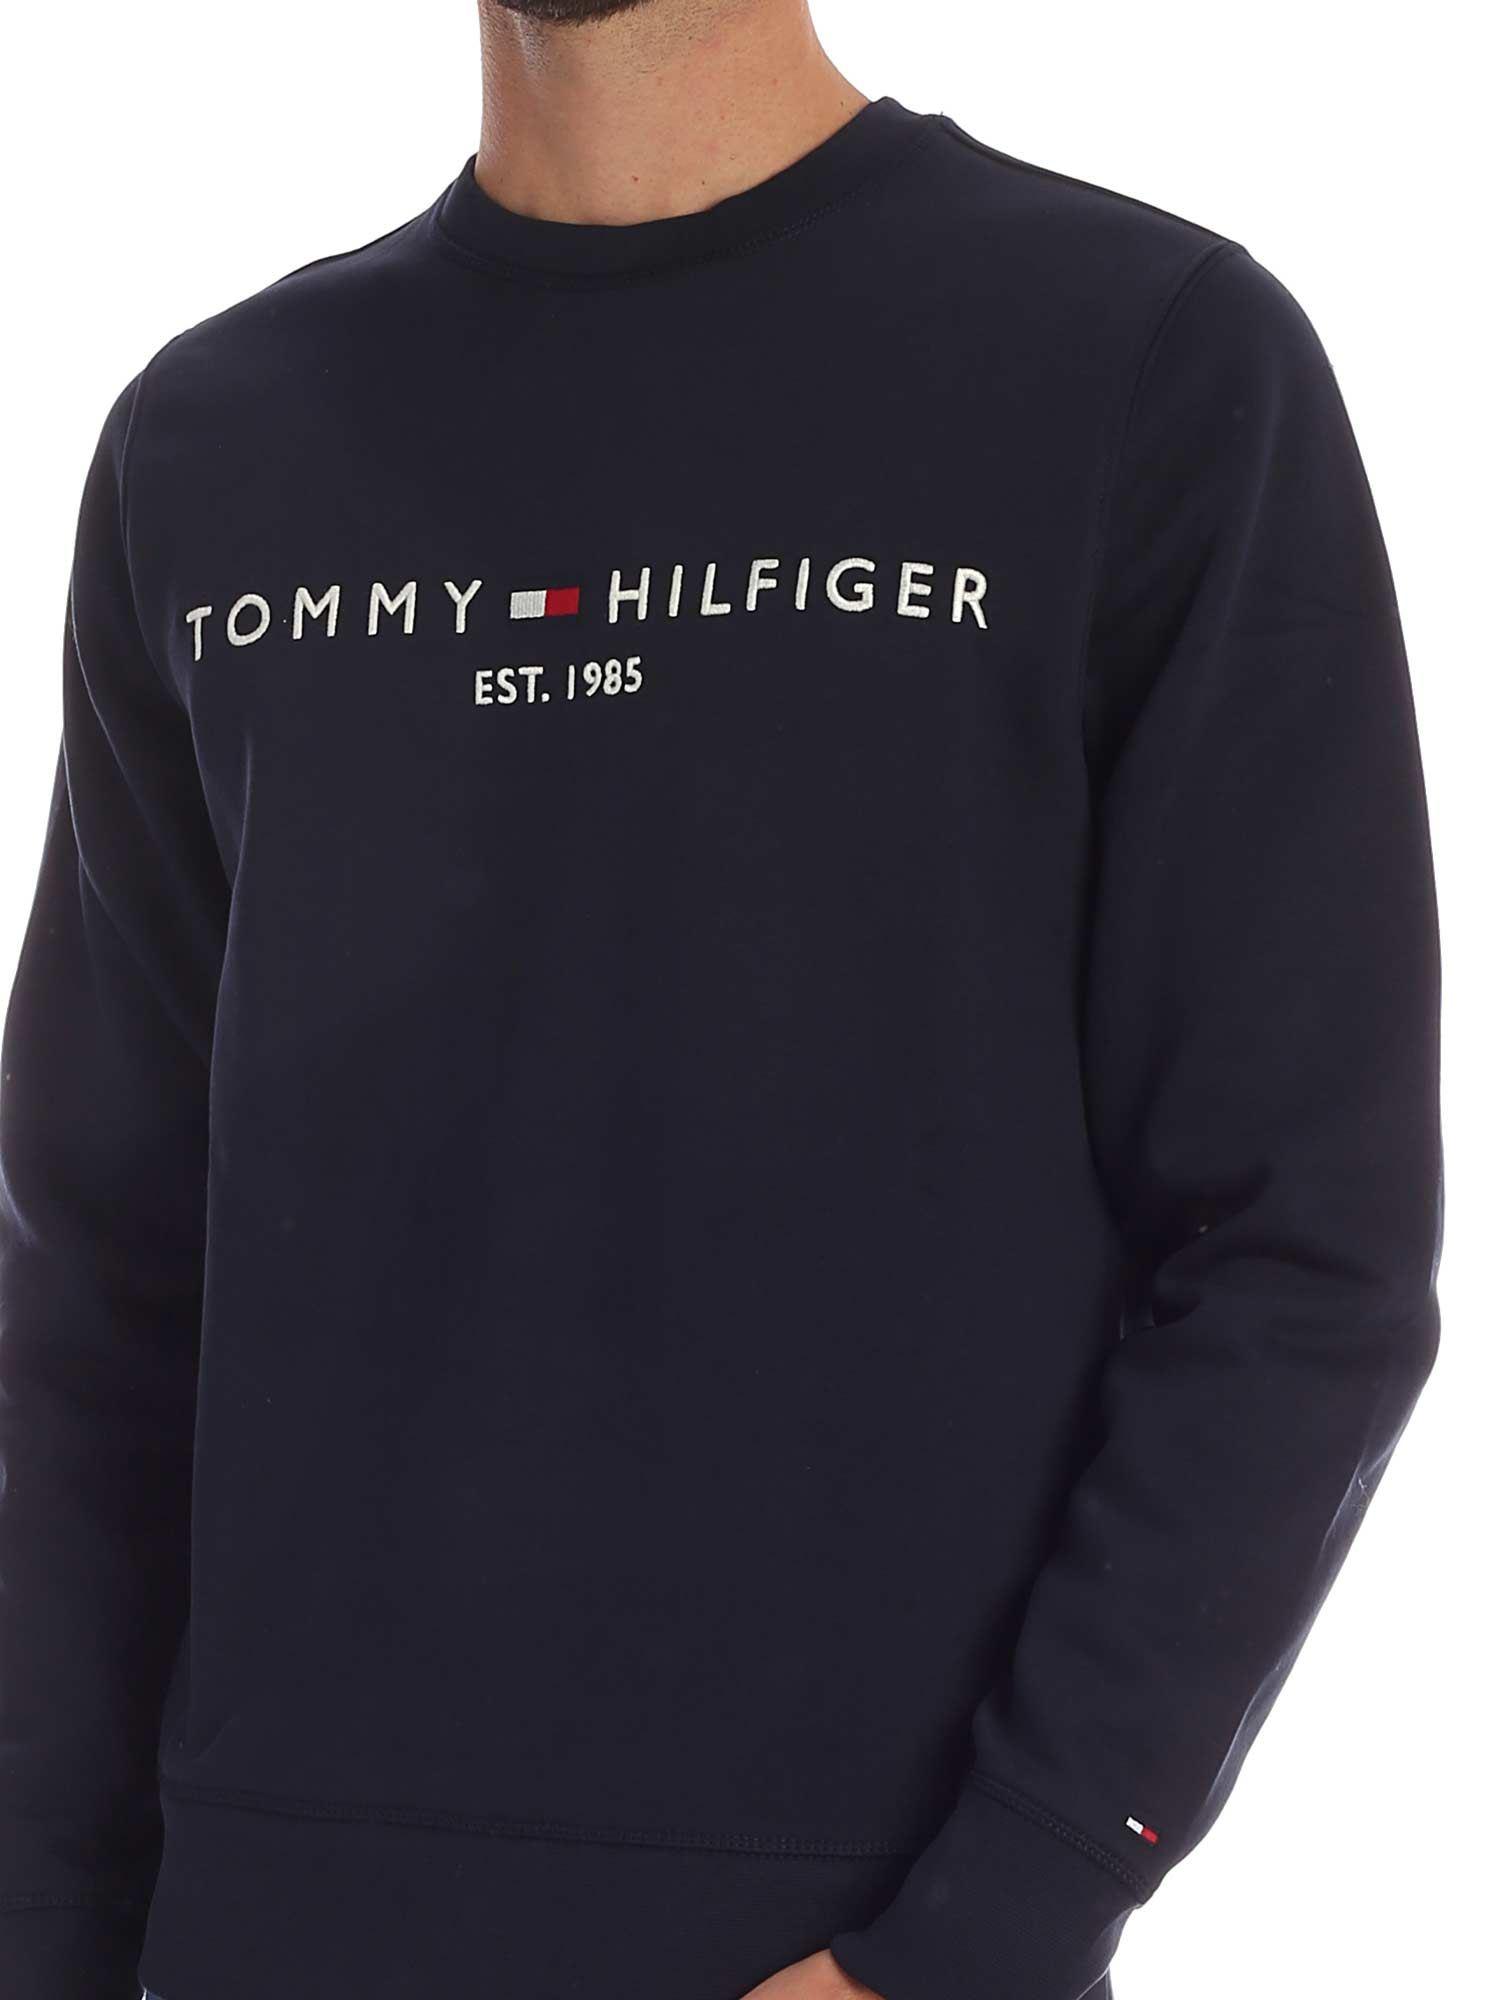 Tommy Hilfiger Cotton Blue Sweatshirt With Logo Embroidery for Men - Lyst